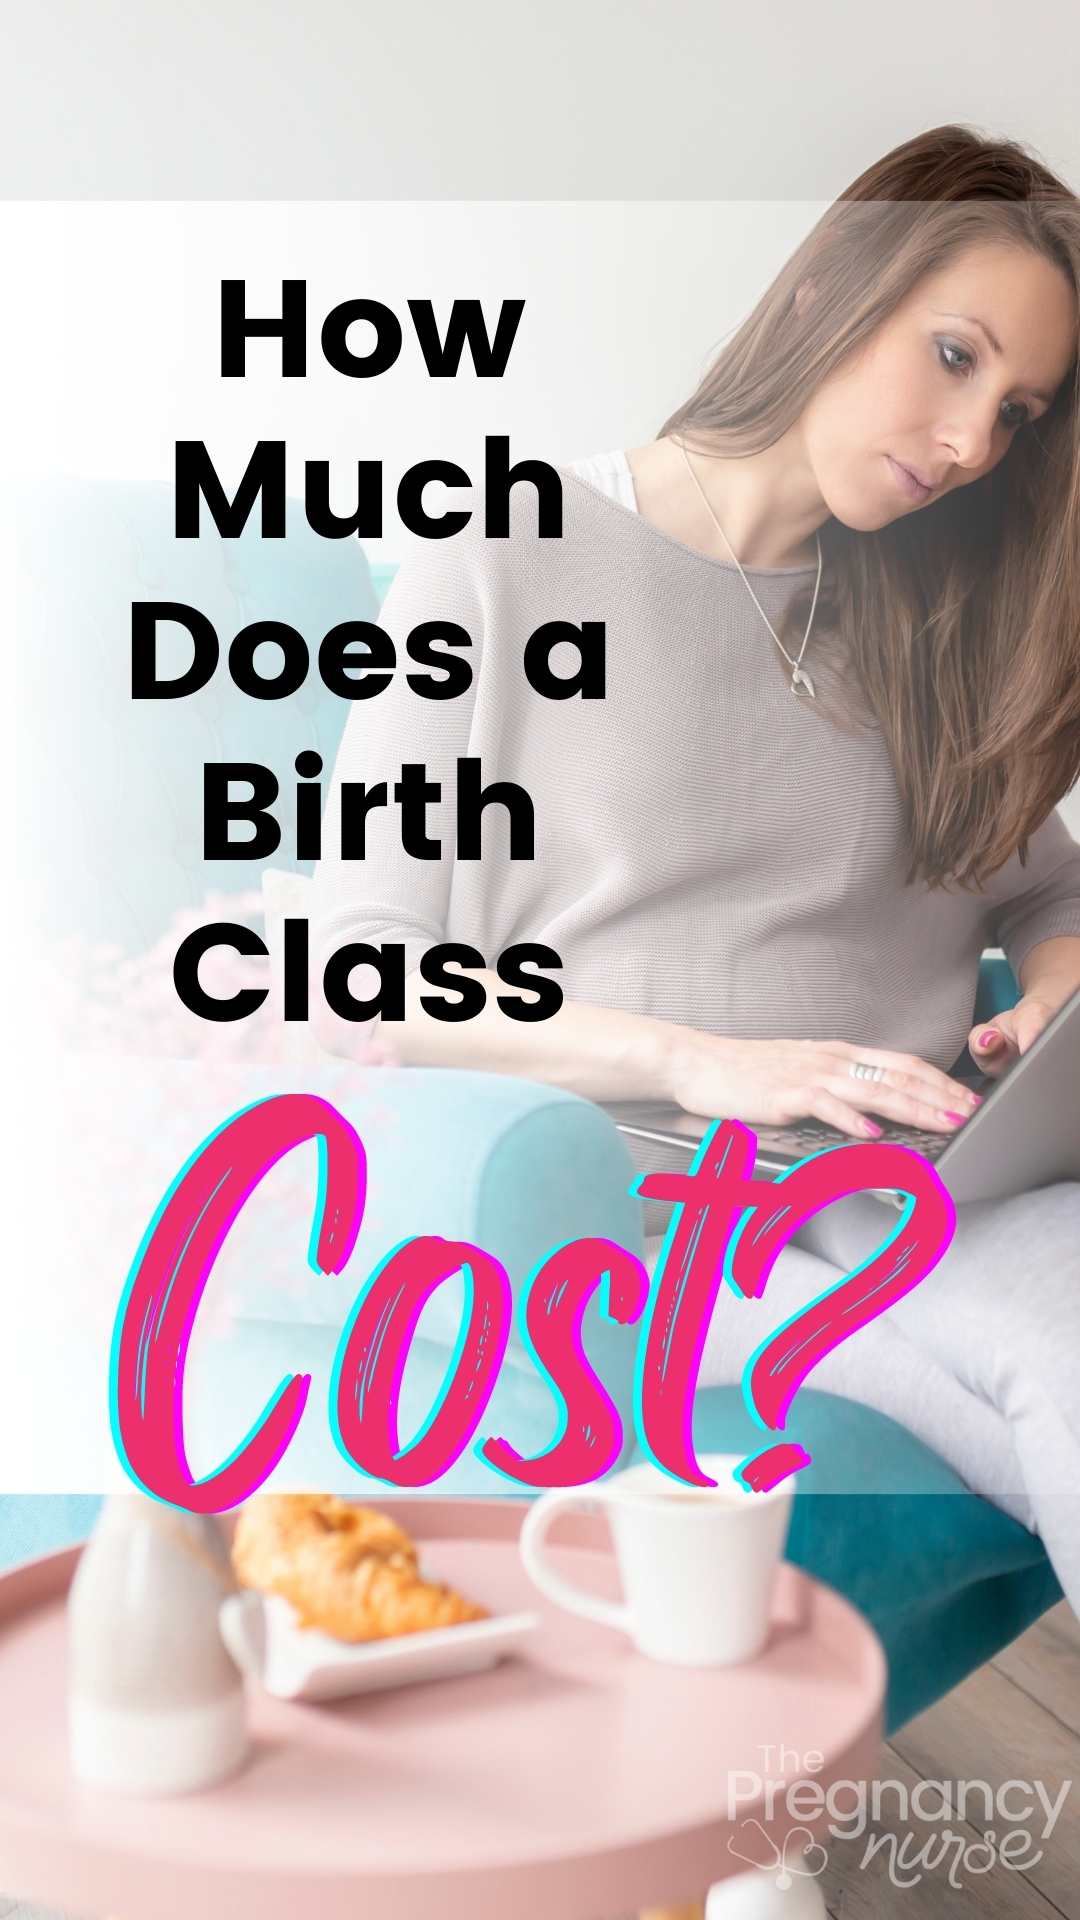 Are you pregnant and trying to figure out the best way to take birthing classes? Look no further! This post outlines the best (and cheapest) way to take birthing classes. Plus, we've got a few tips on how to make sure you're getting the most for your money.